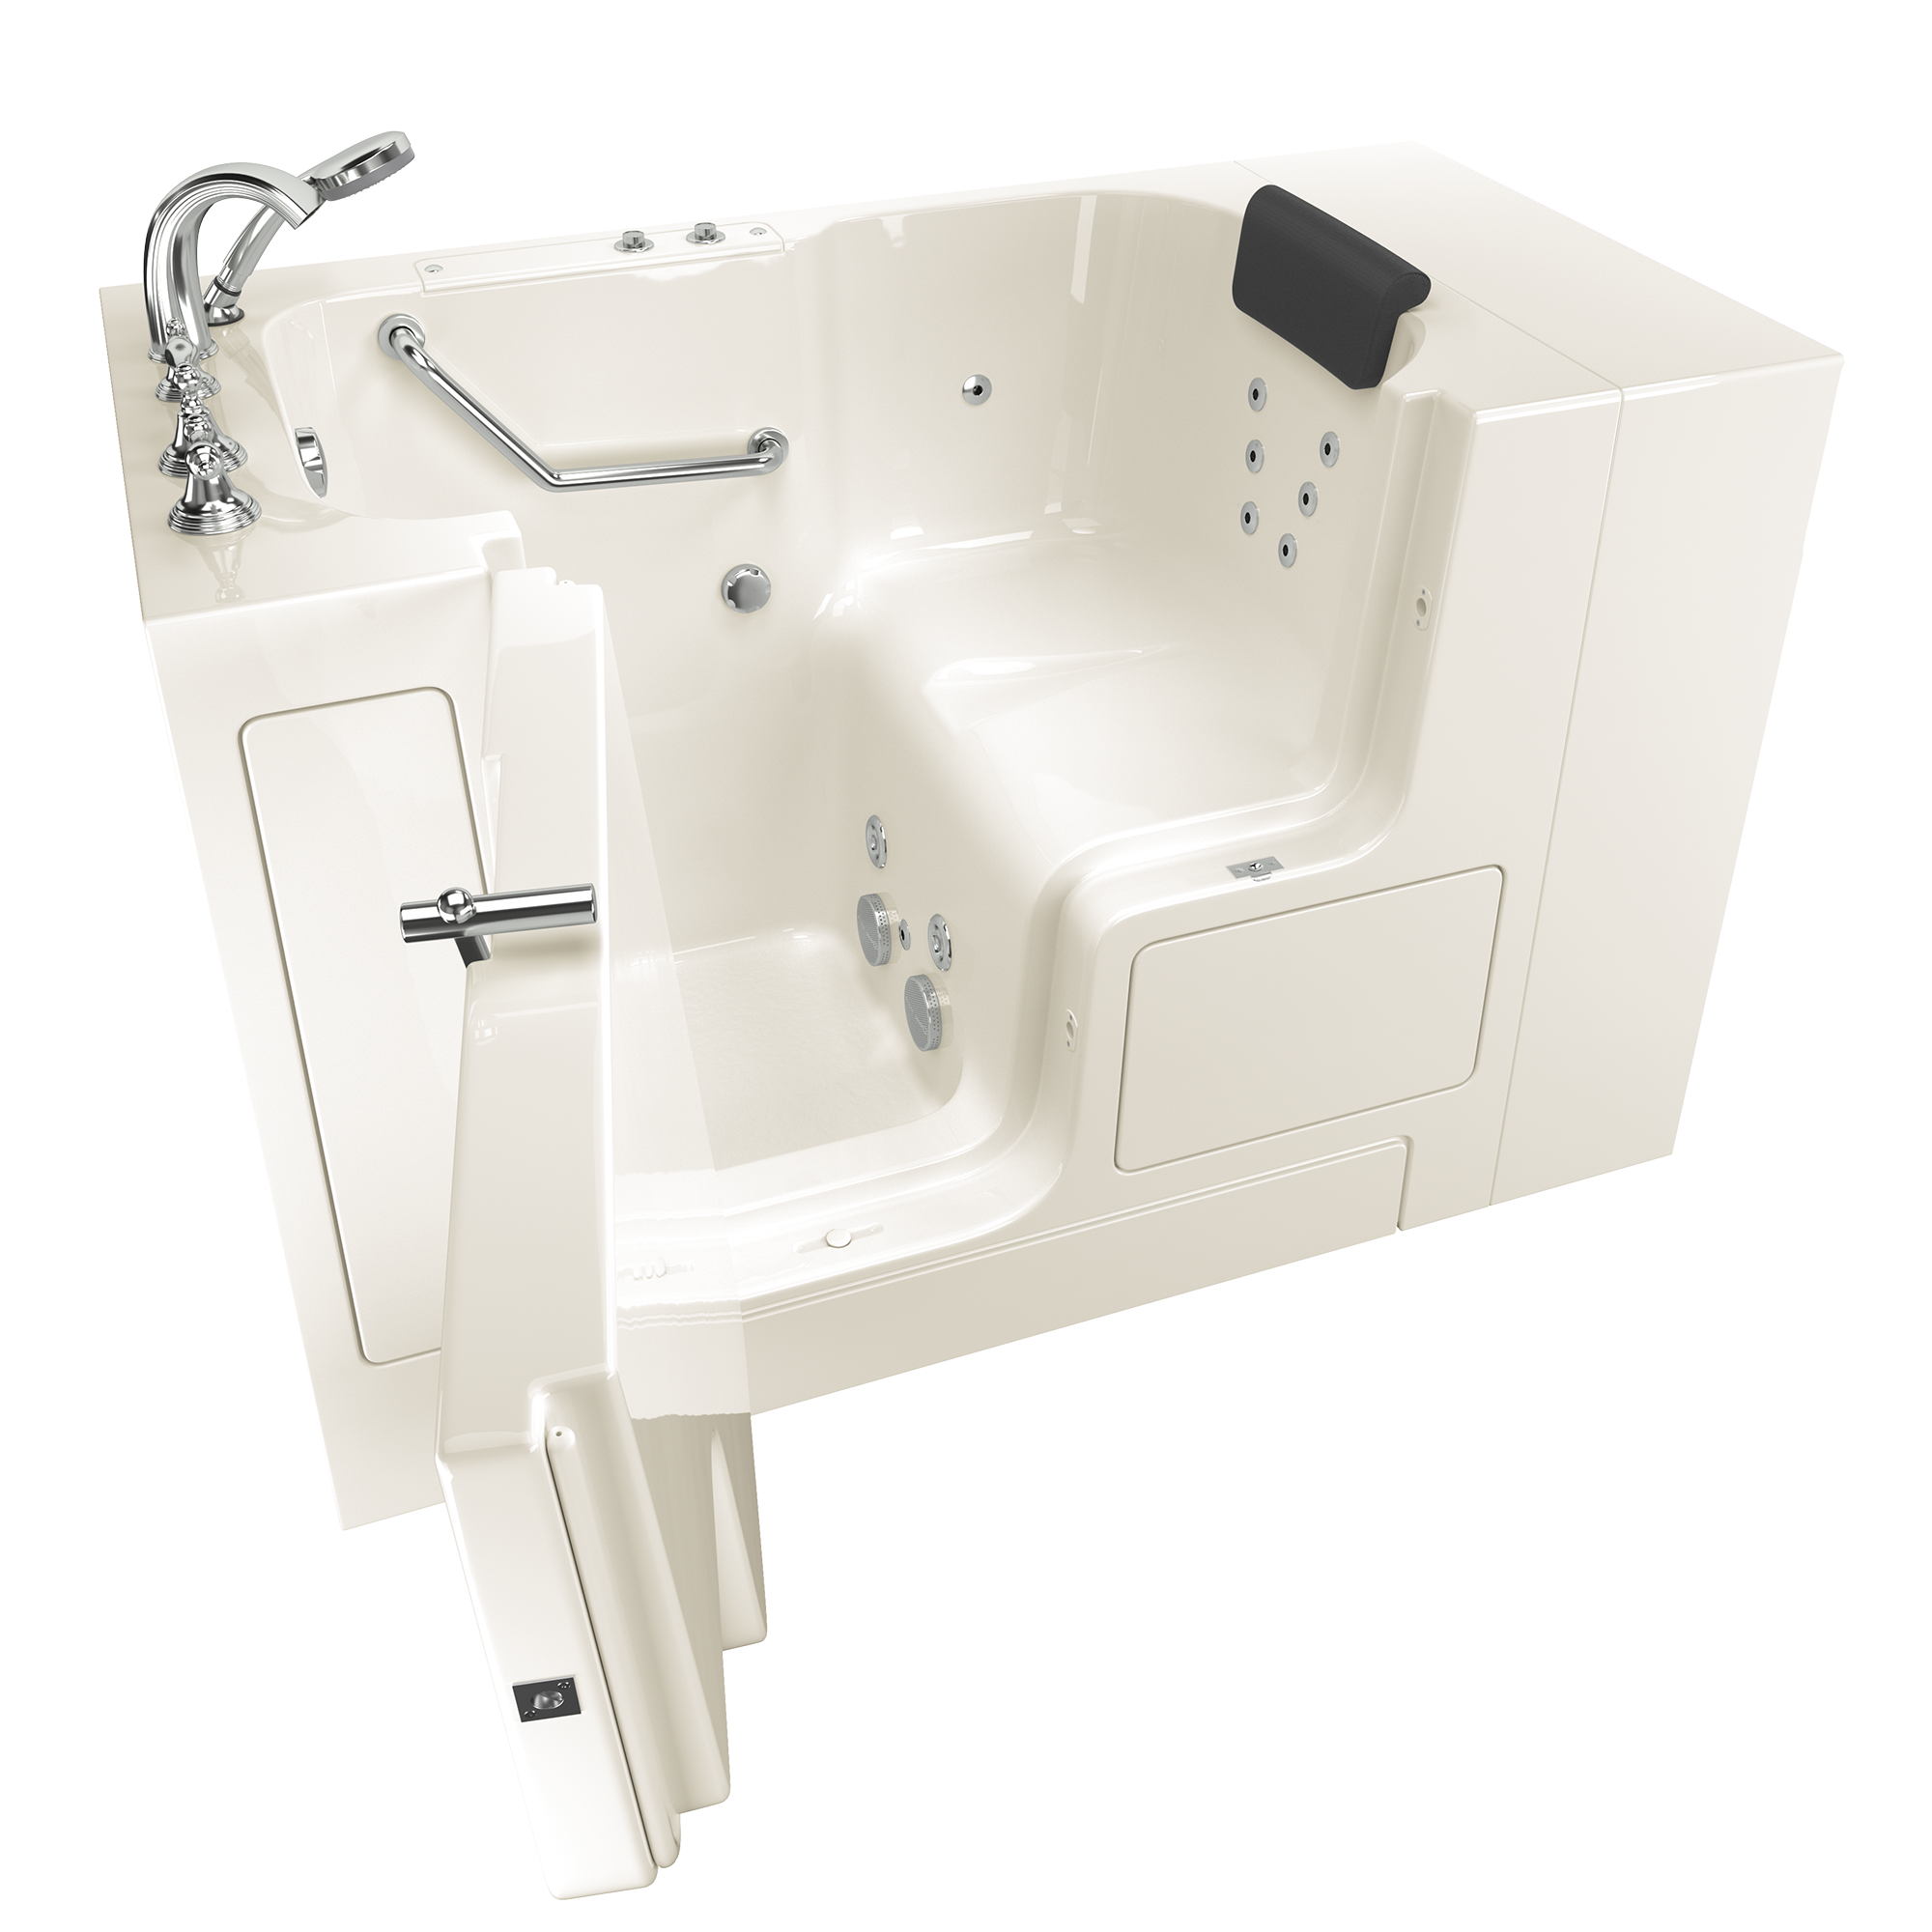 Gelcoat Premium Series 32 x 52 -Inch Walk-in Tub With Whirlpool System - Left-Hand Drain With Faucet